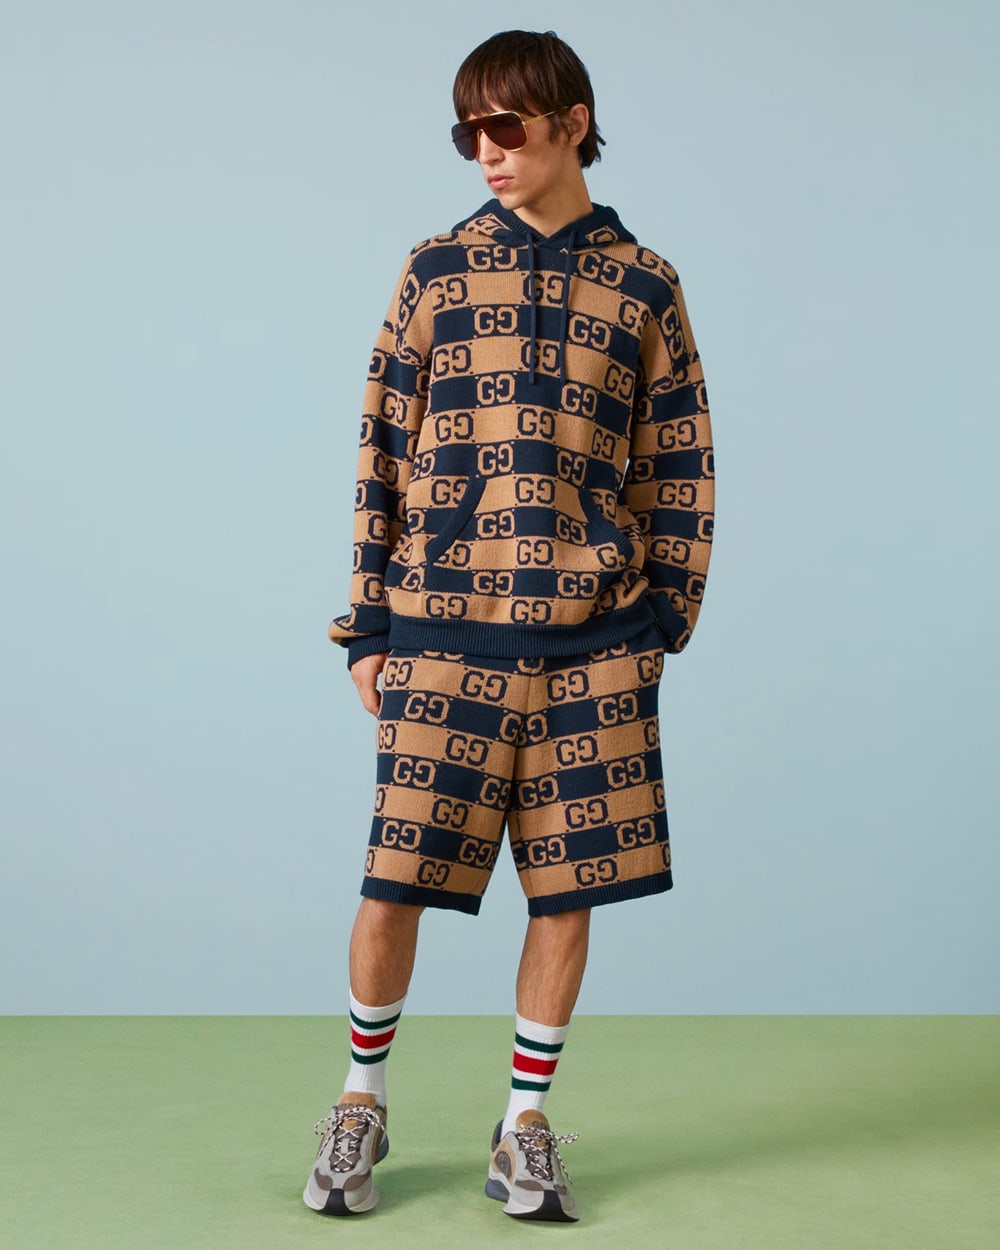 Man wearing a navy/brown check Gucci logo hoodie and matching shorts with white tube socks and sneakers